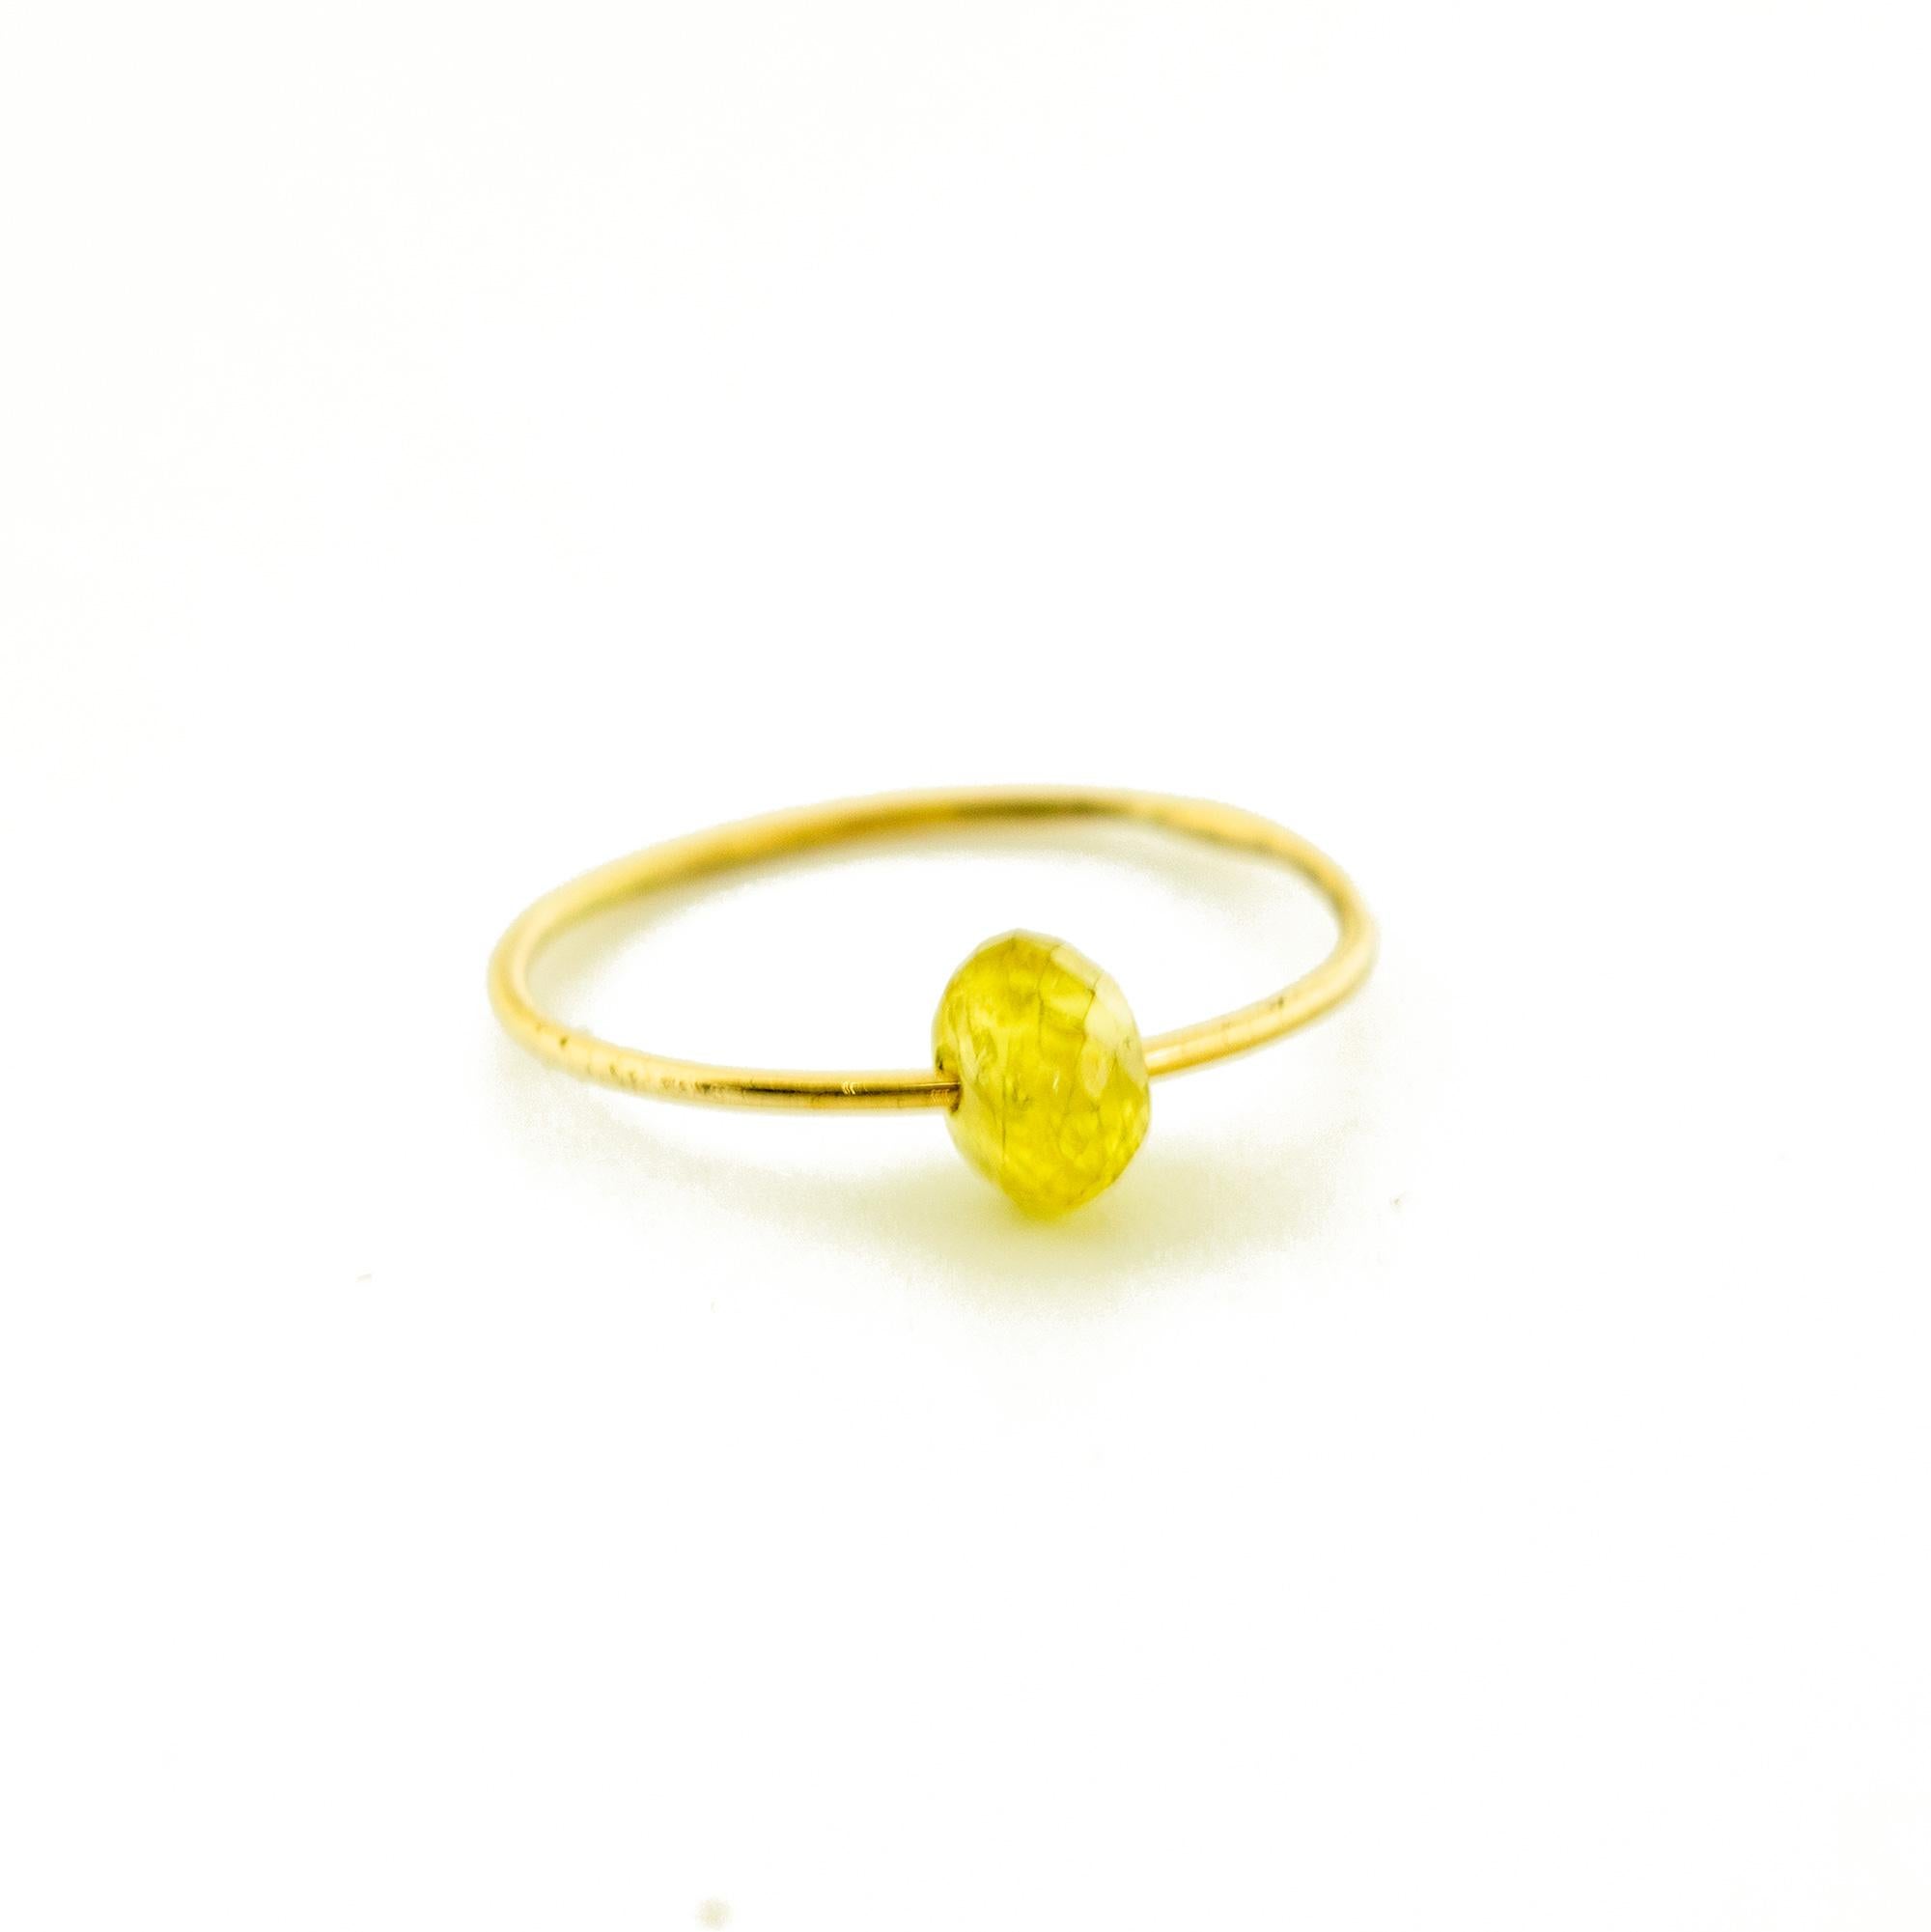 Signature INTINI Jewels Planet ring. Contemporary ring design in 18 karat yellow gold.  Passion and intensity mixed in one jewel. Delight yourself with a strong, minimalist design, just for a stunning chic look. This fancy design is made for a woman